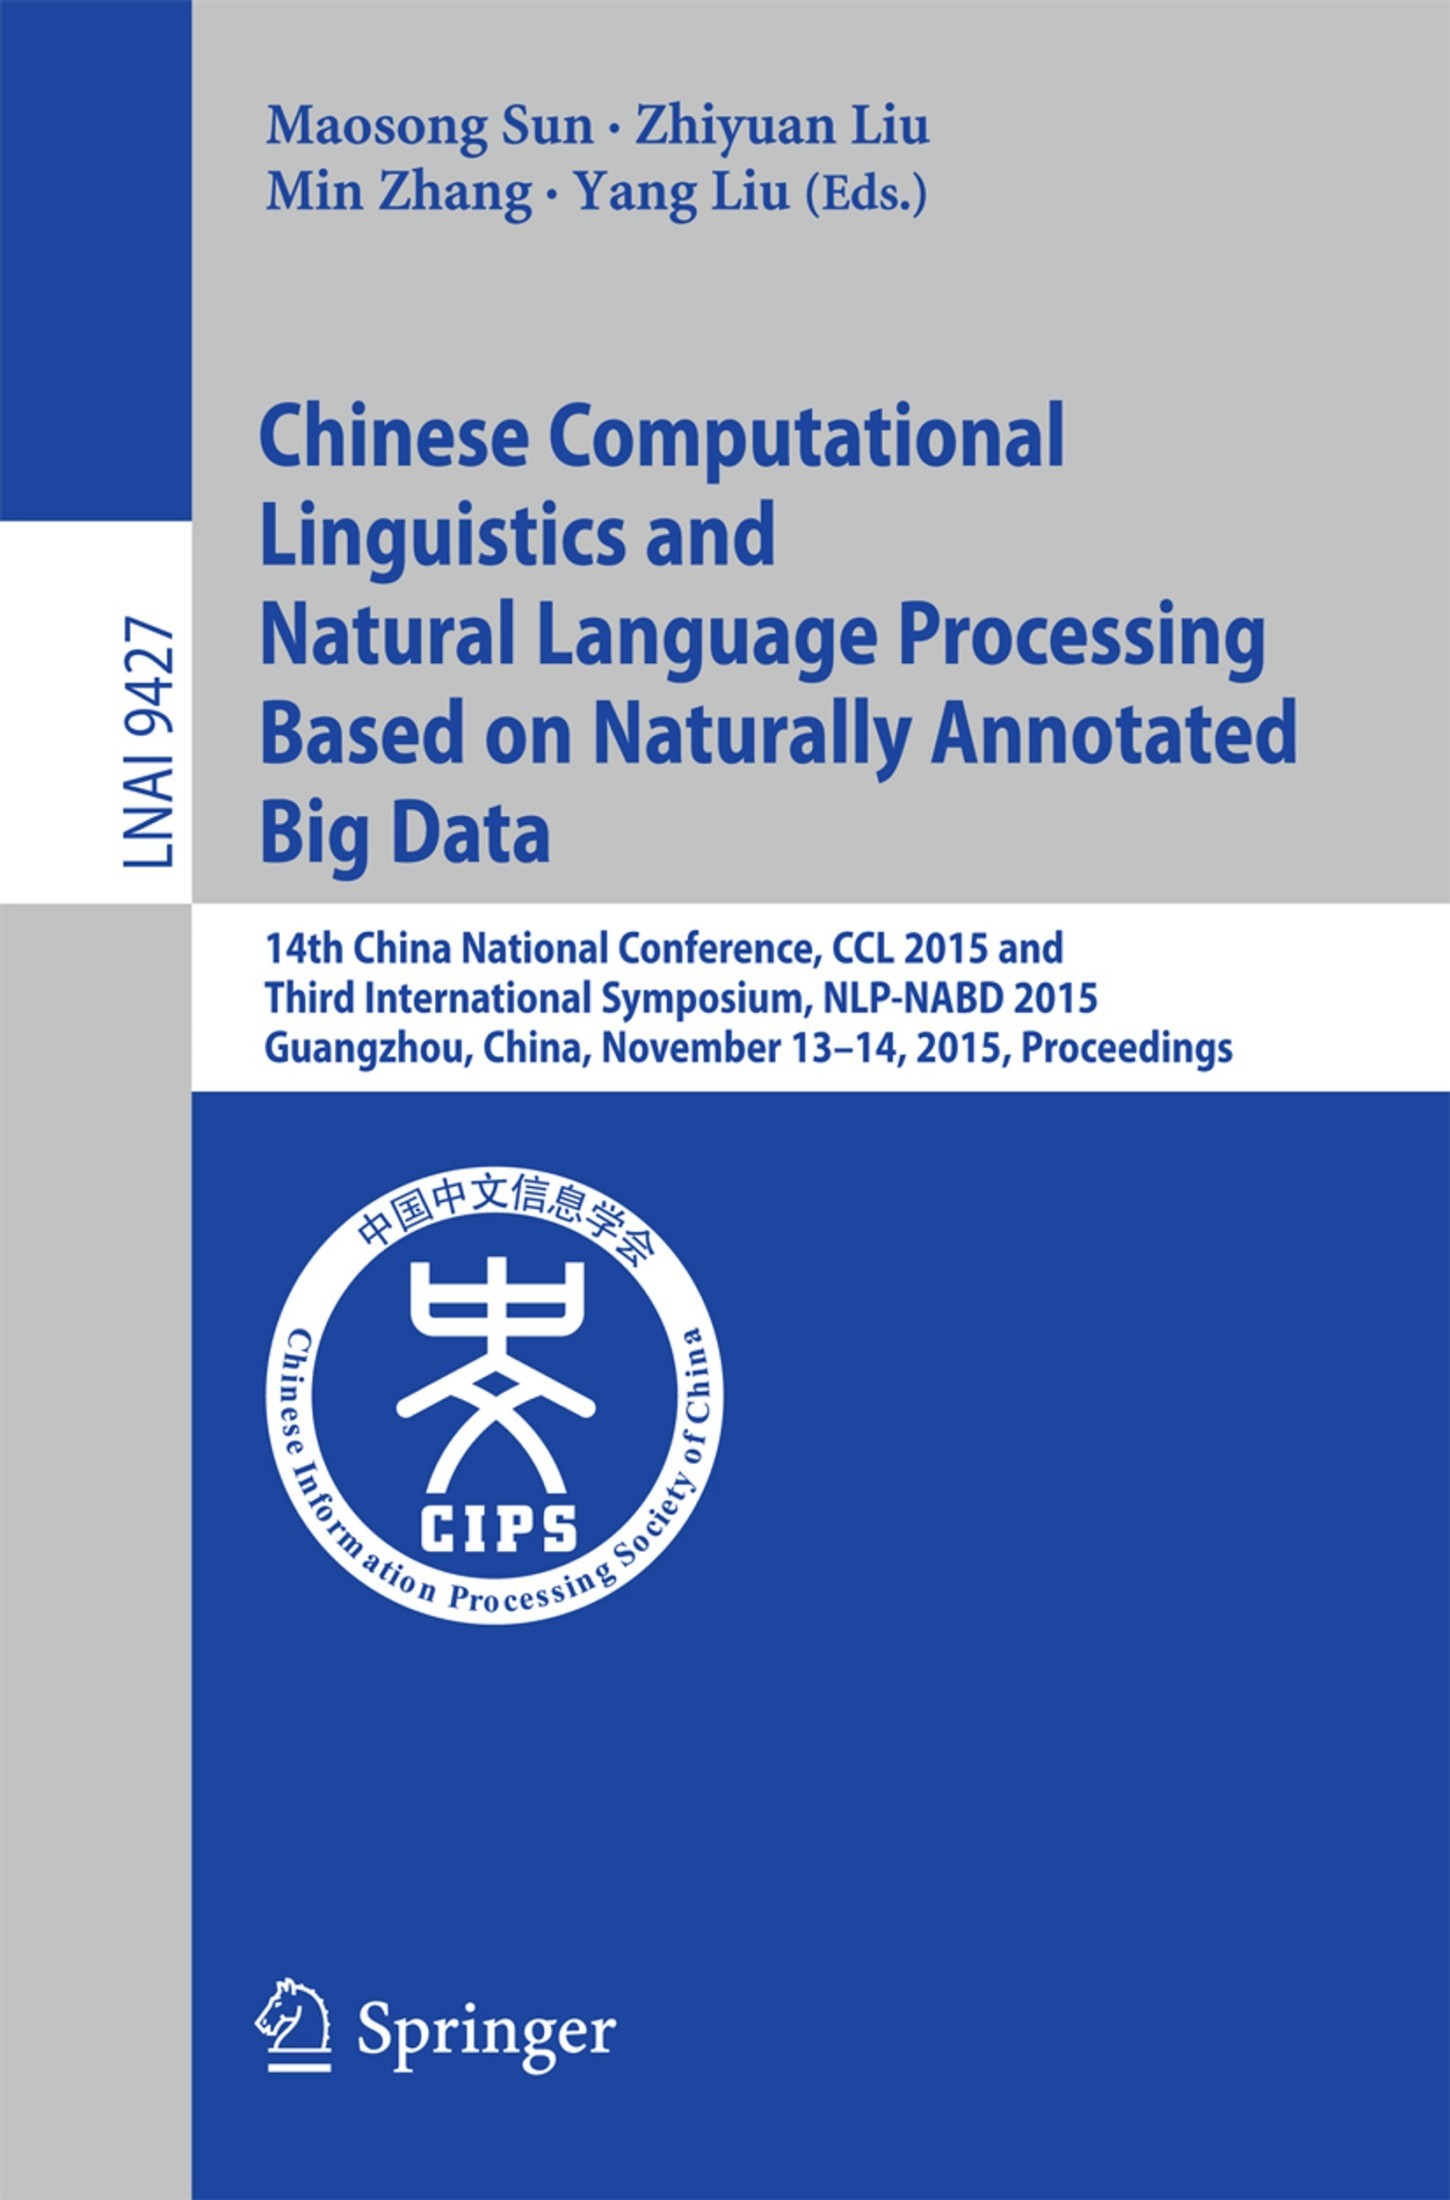 Chinese Computational Linguistics and Natural Language Processing Based on Naturally Annotated Big Data: 13th China National Conference, CCL 2014, and First International Symposium, NLP-NABD 2014, Wuhan, China, October 18-19, 2014. Proceedings